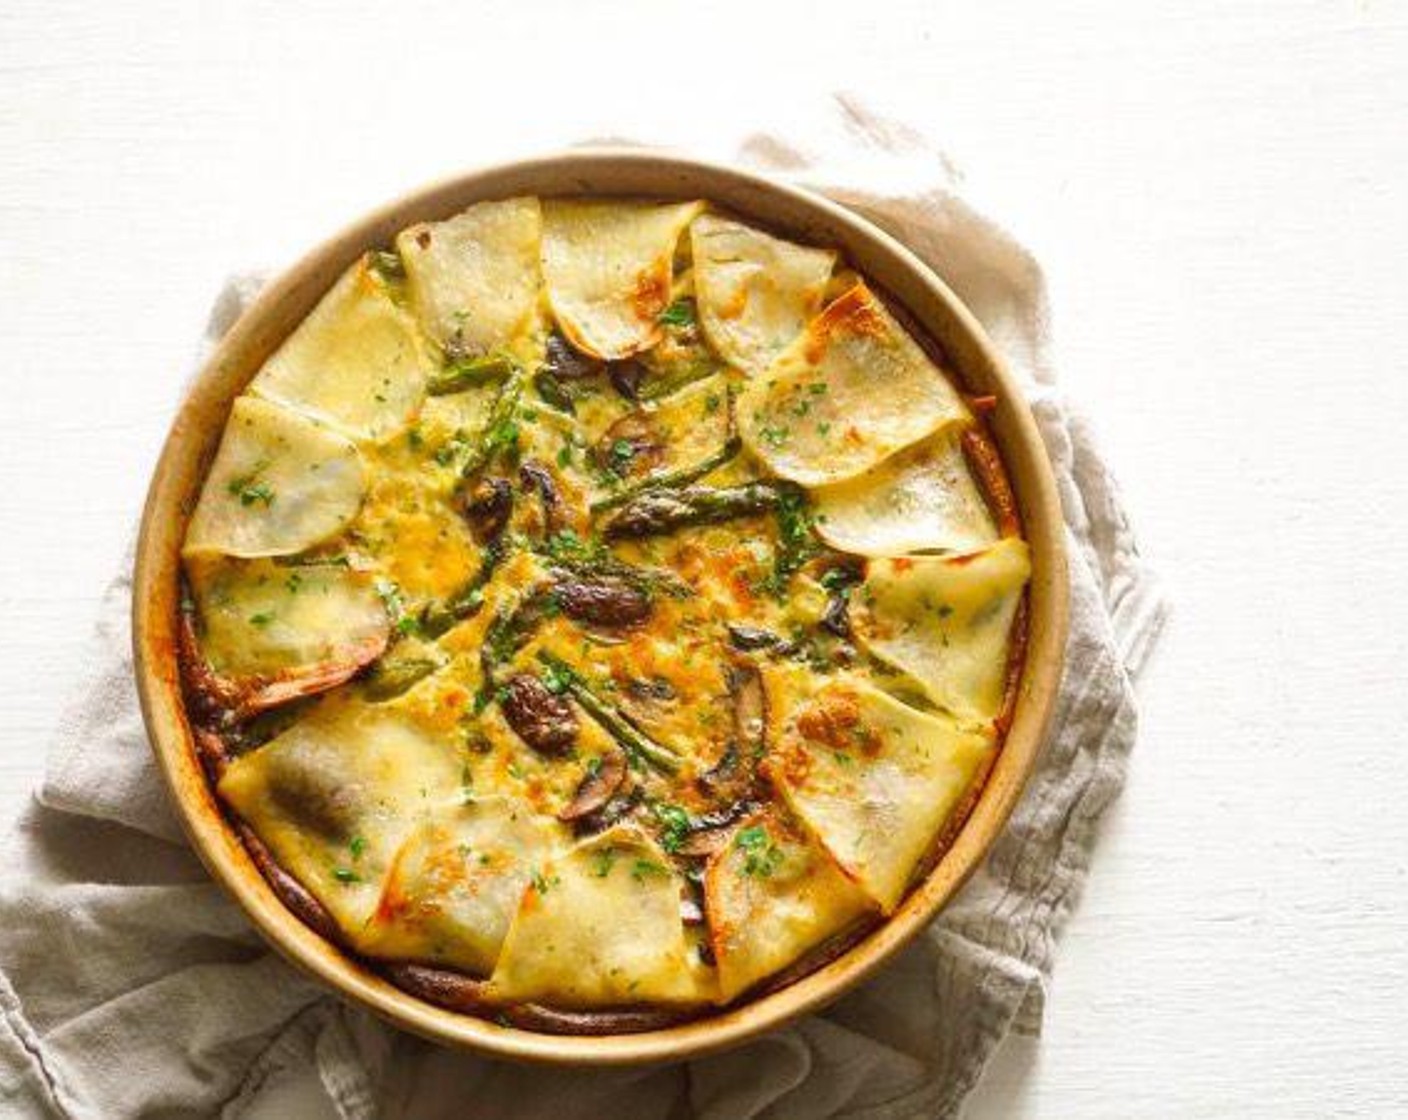 Potato Crusted Quiche with Asparagus and Mushrooms